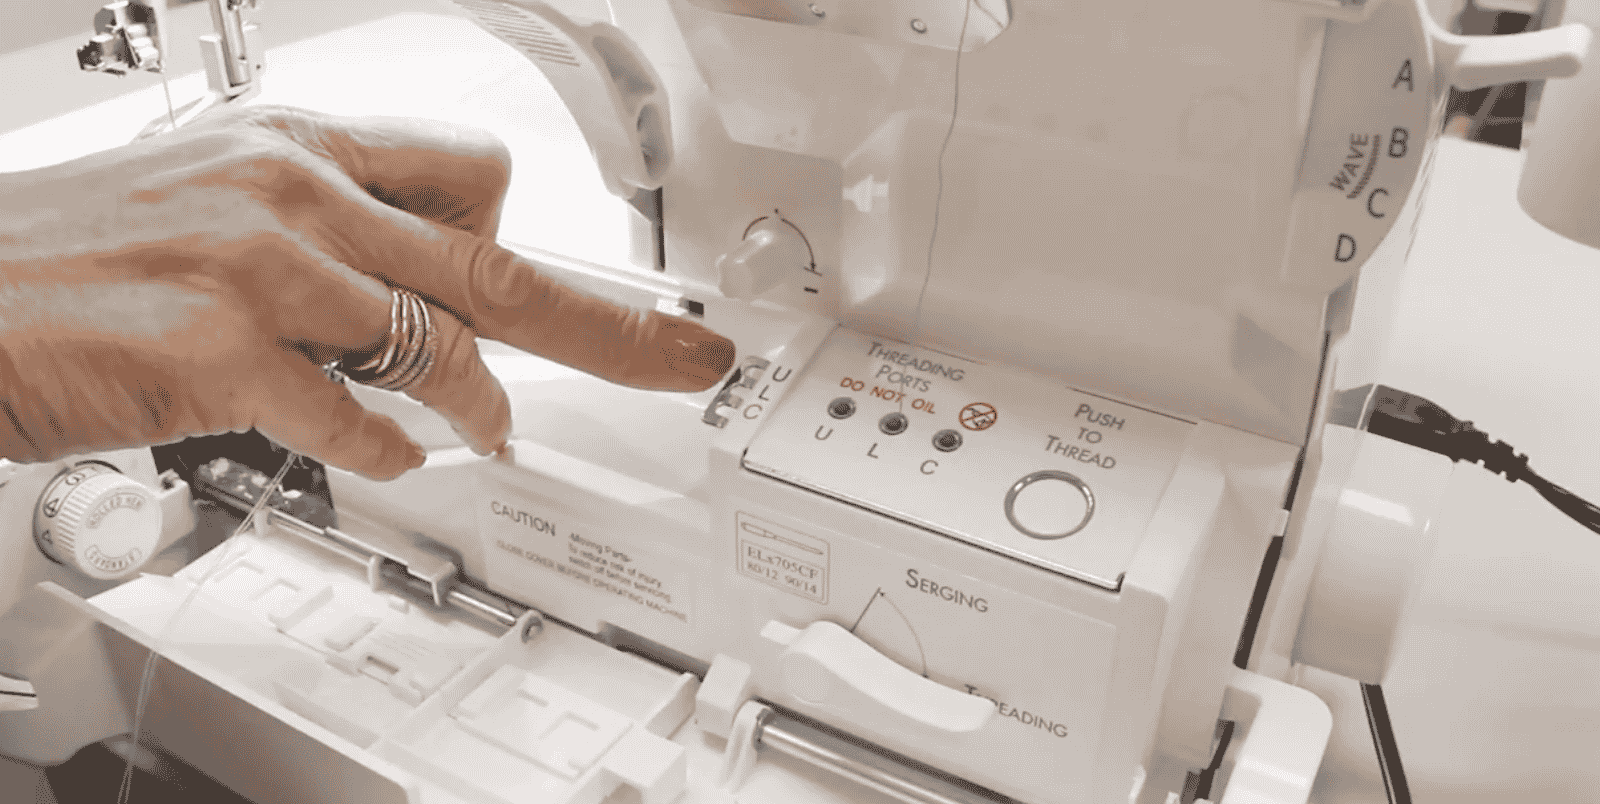 A picture containing sewing machine, indoor, appliance, person

Description automatically generated